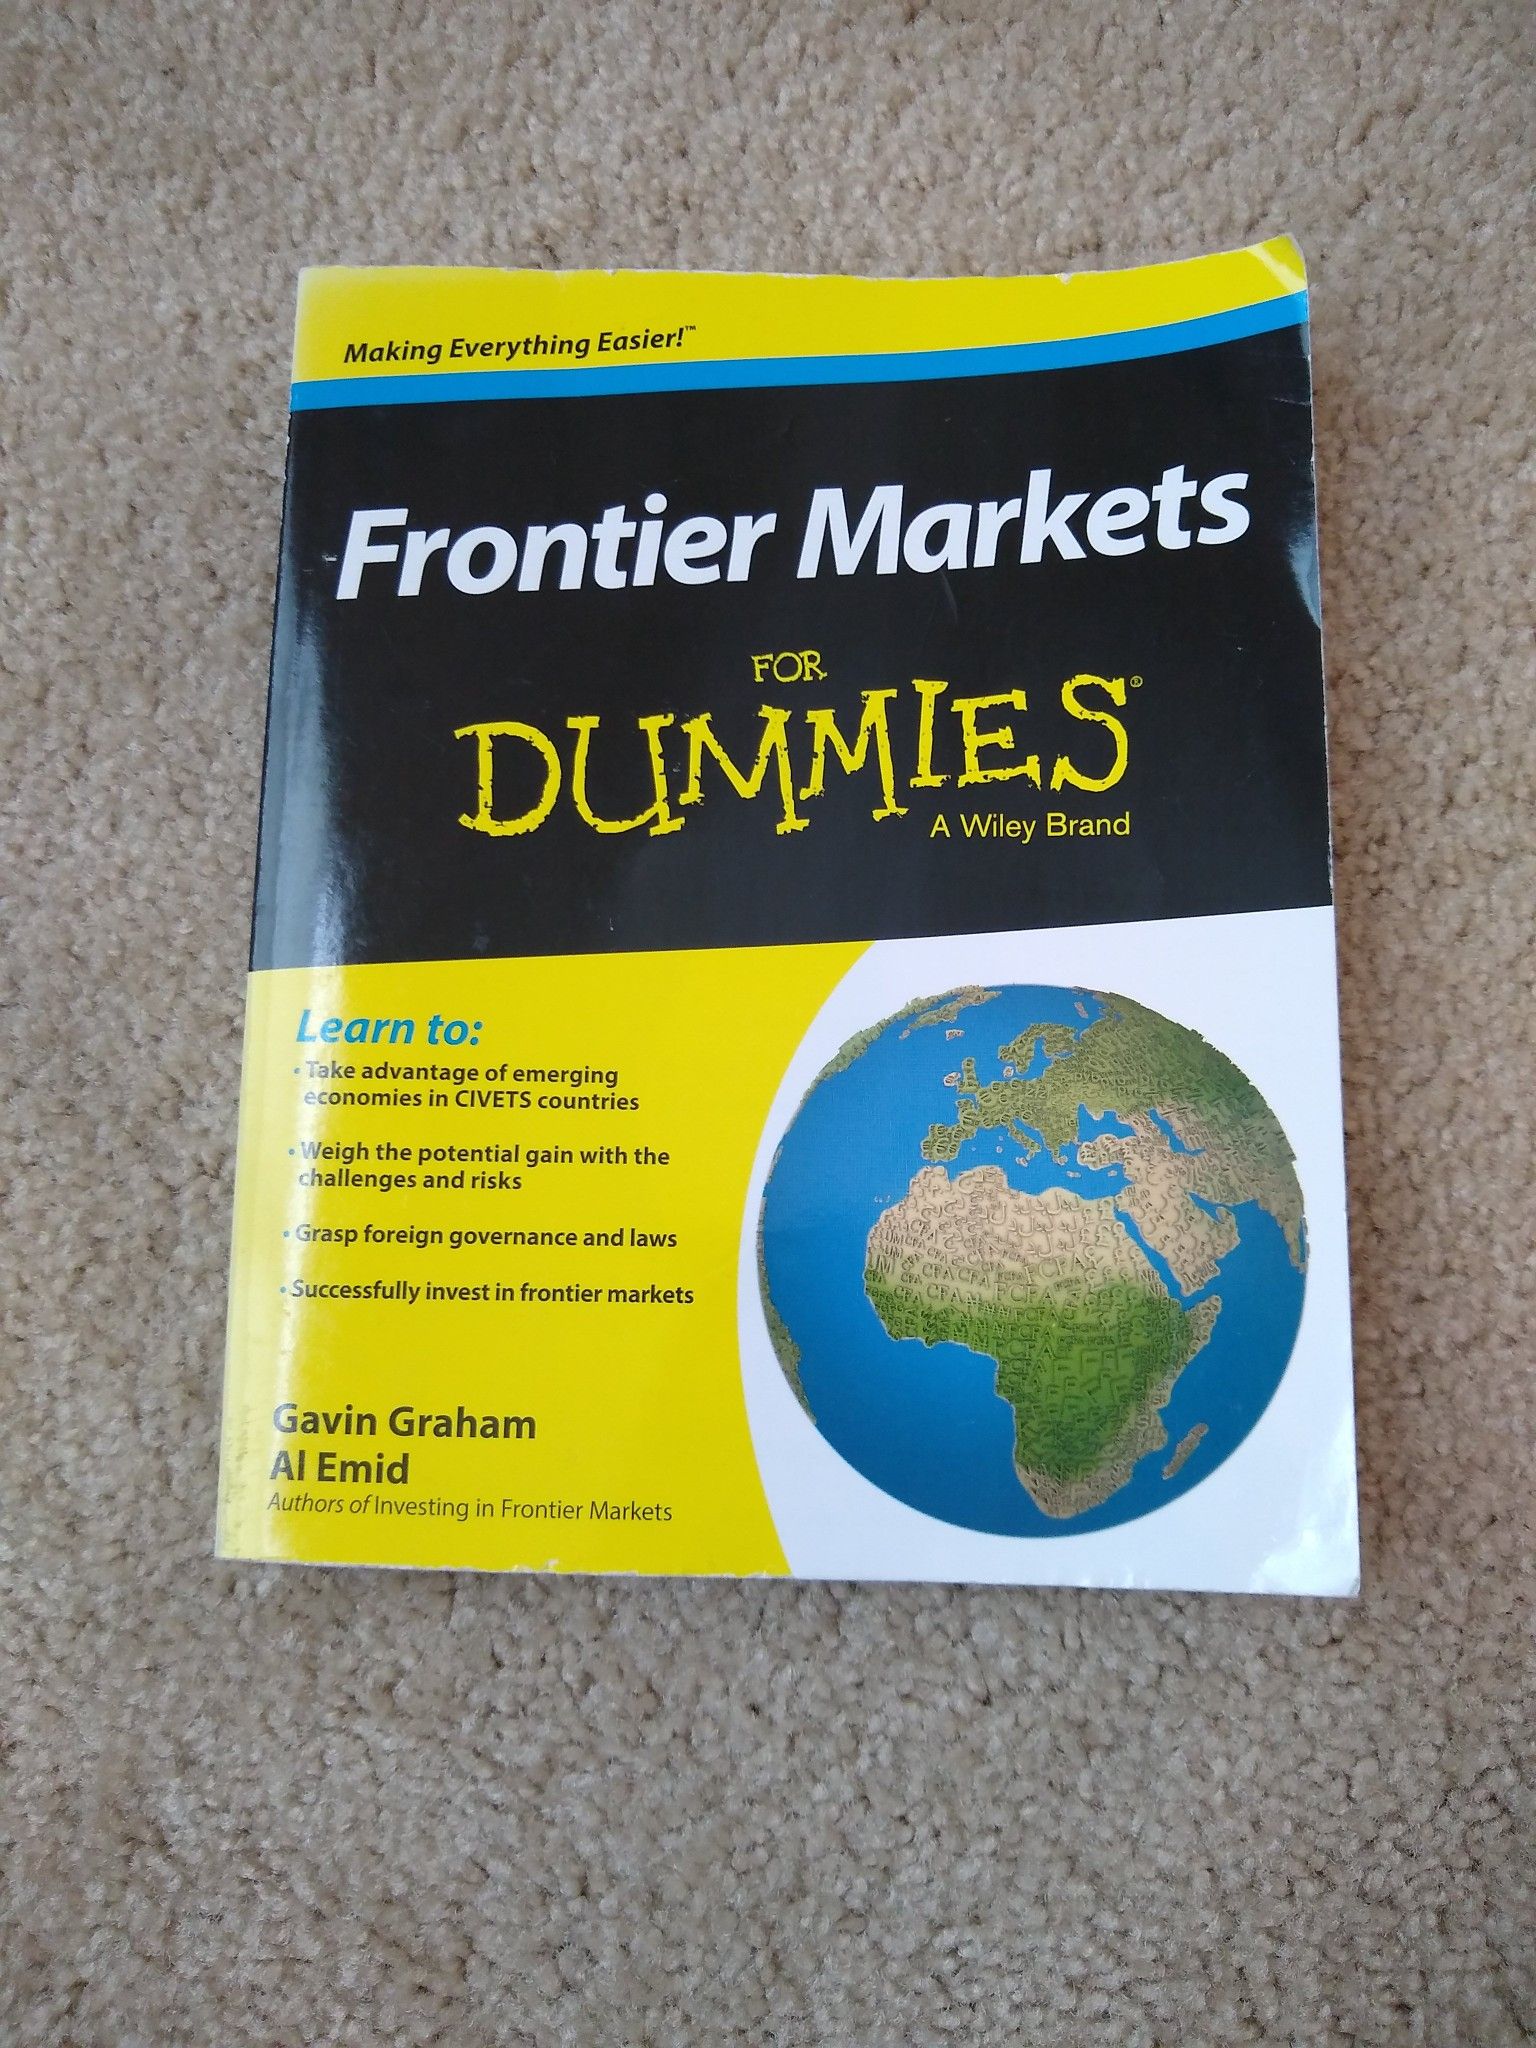 Frontier Markets for Dummies® by Al Emid, Gavin Graham and Dummies